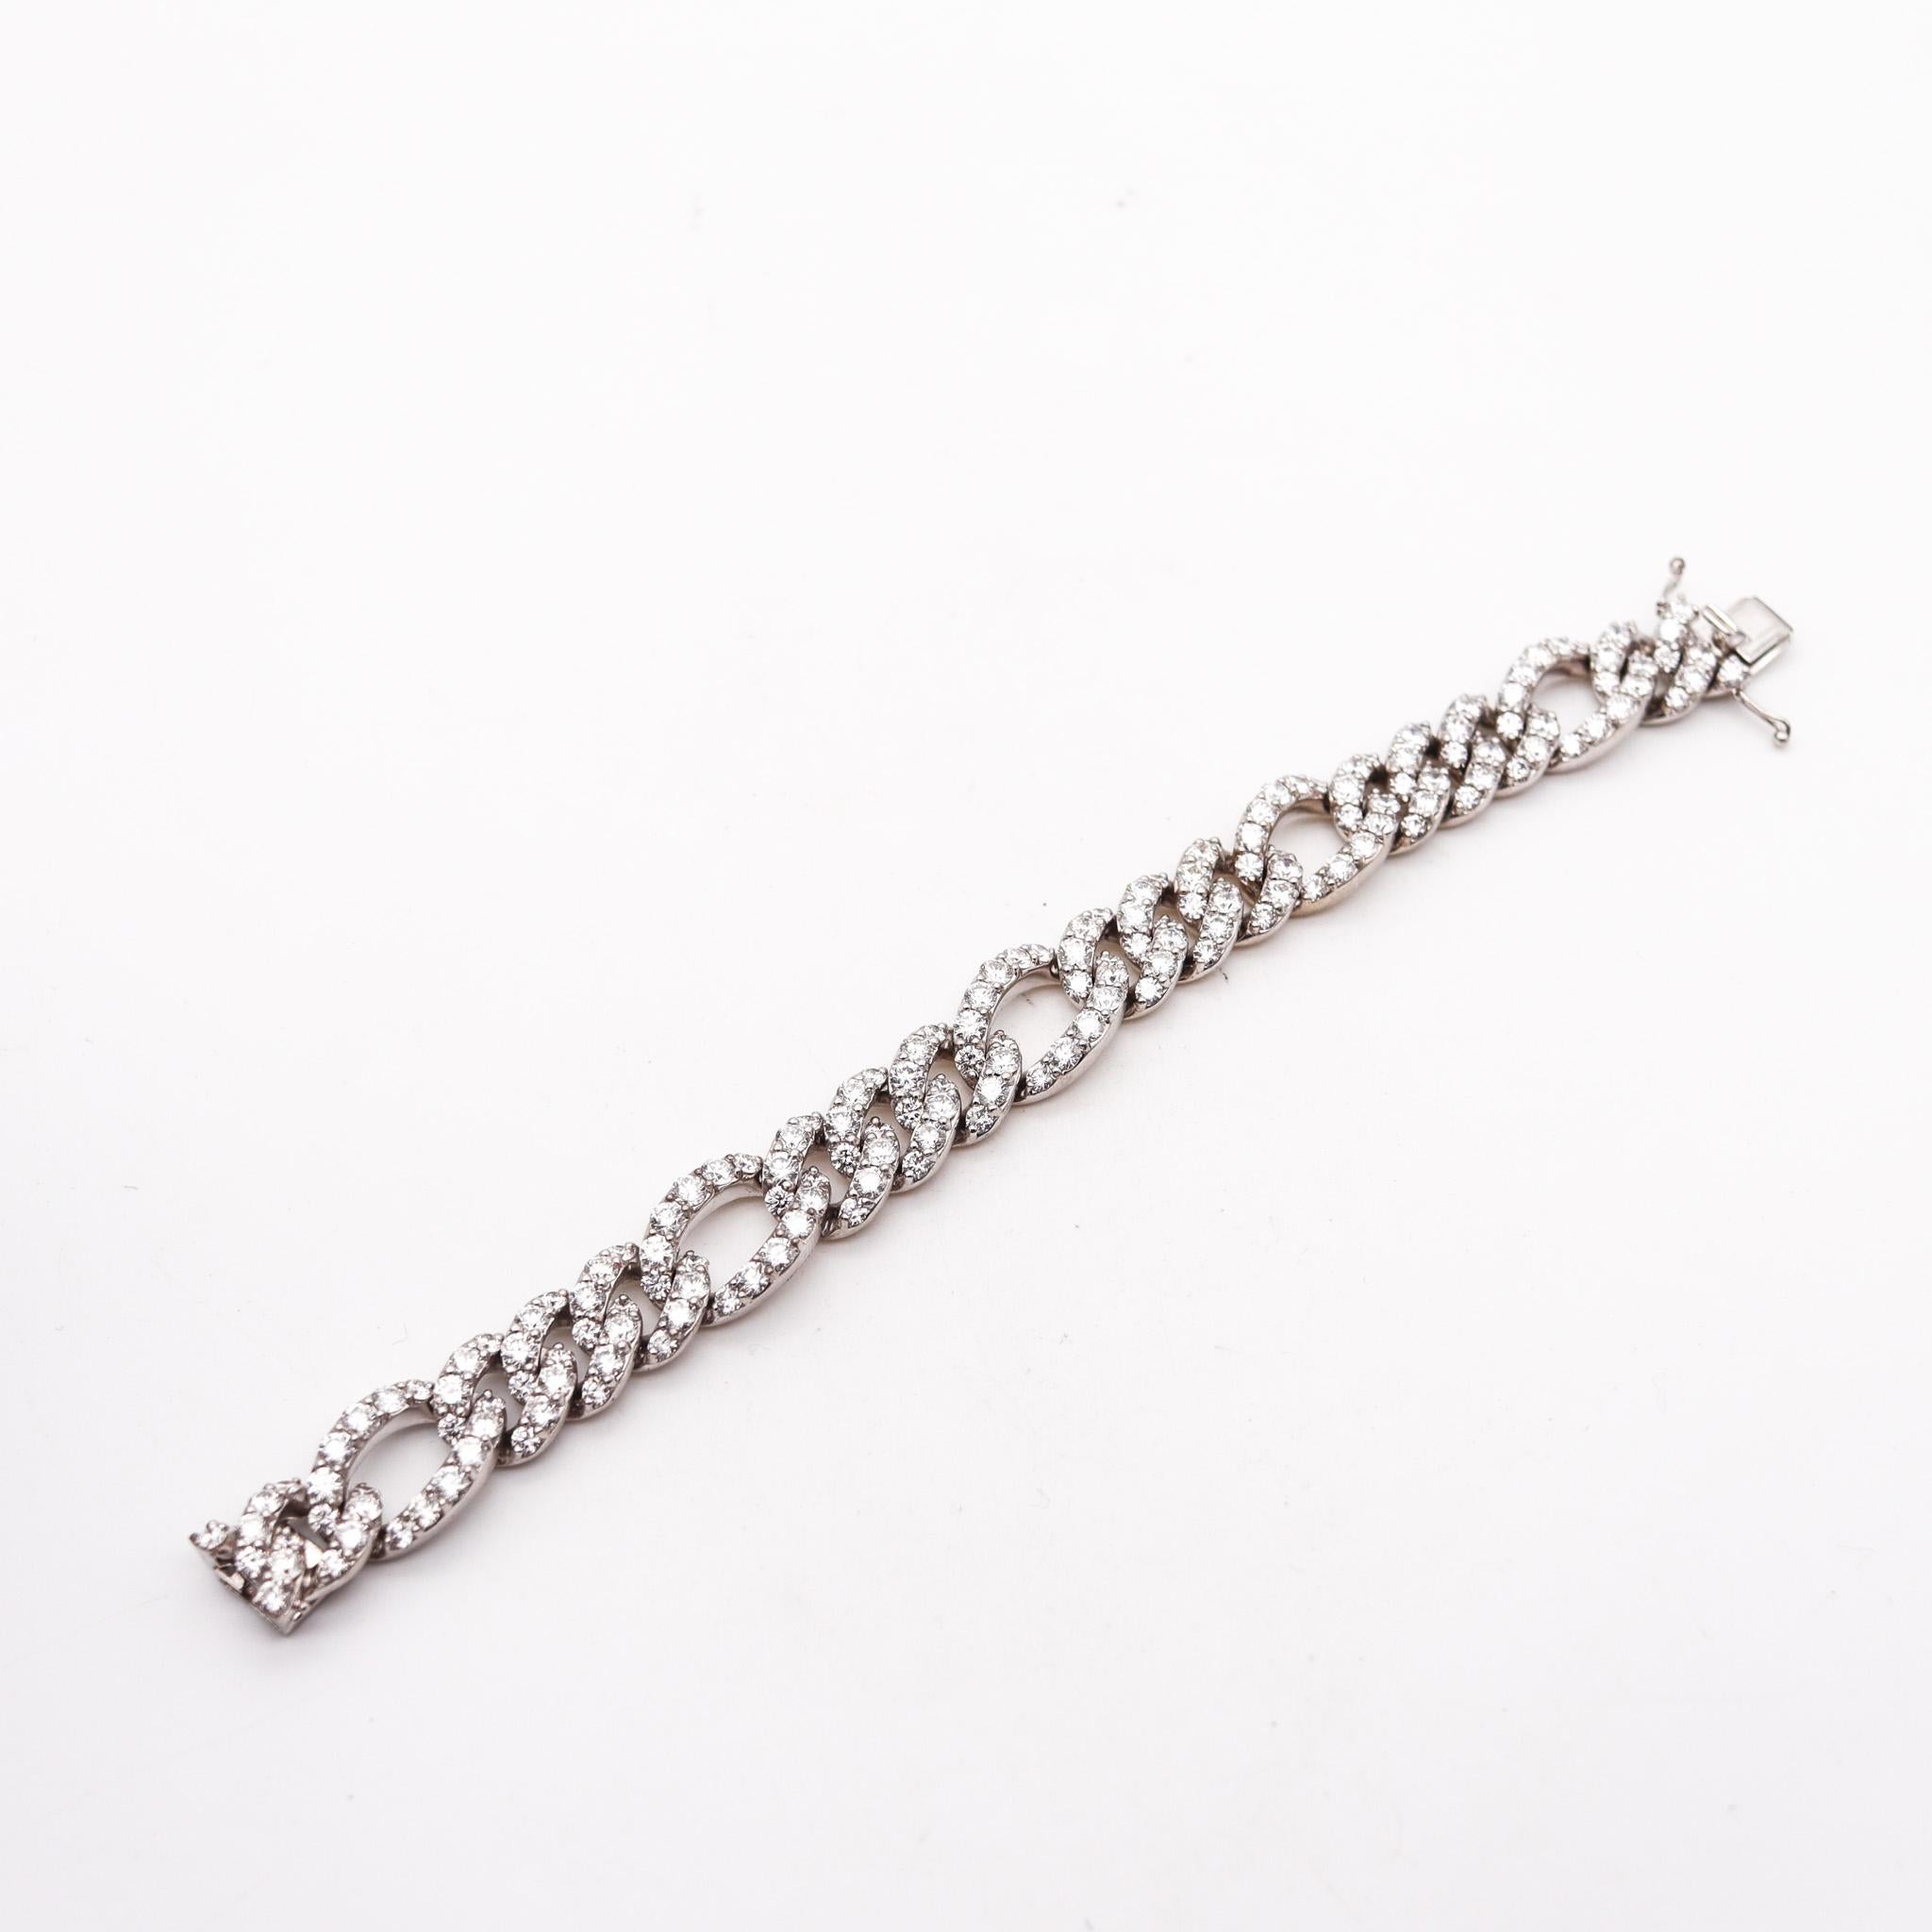 A diamonds bracelet designed by Crivelli Gioielli

Fantastic contemporary bracelet, created in Italy by the jewelry house of Crivelli Gioielli. This exceptional bracelet has been crafted with Figaro-links in solid white gold of 18 karats, with high